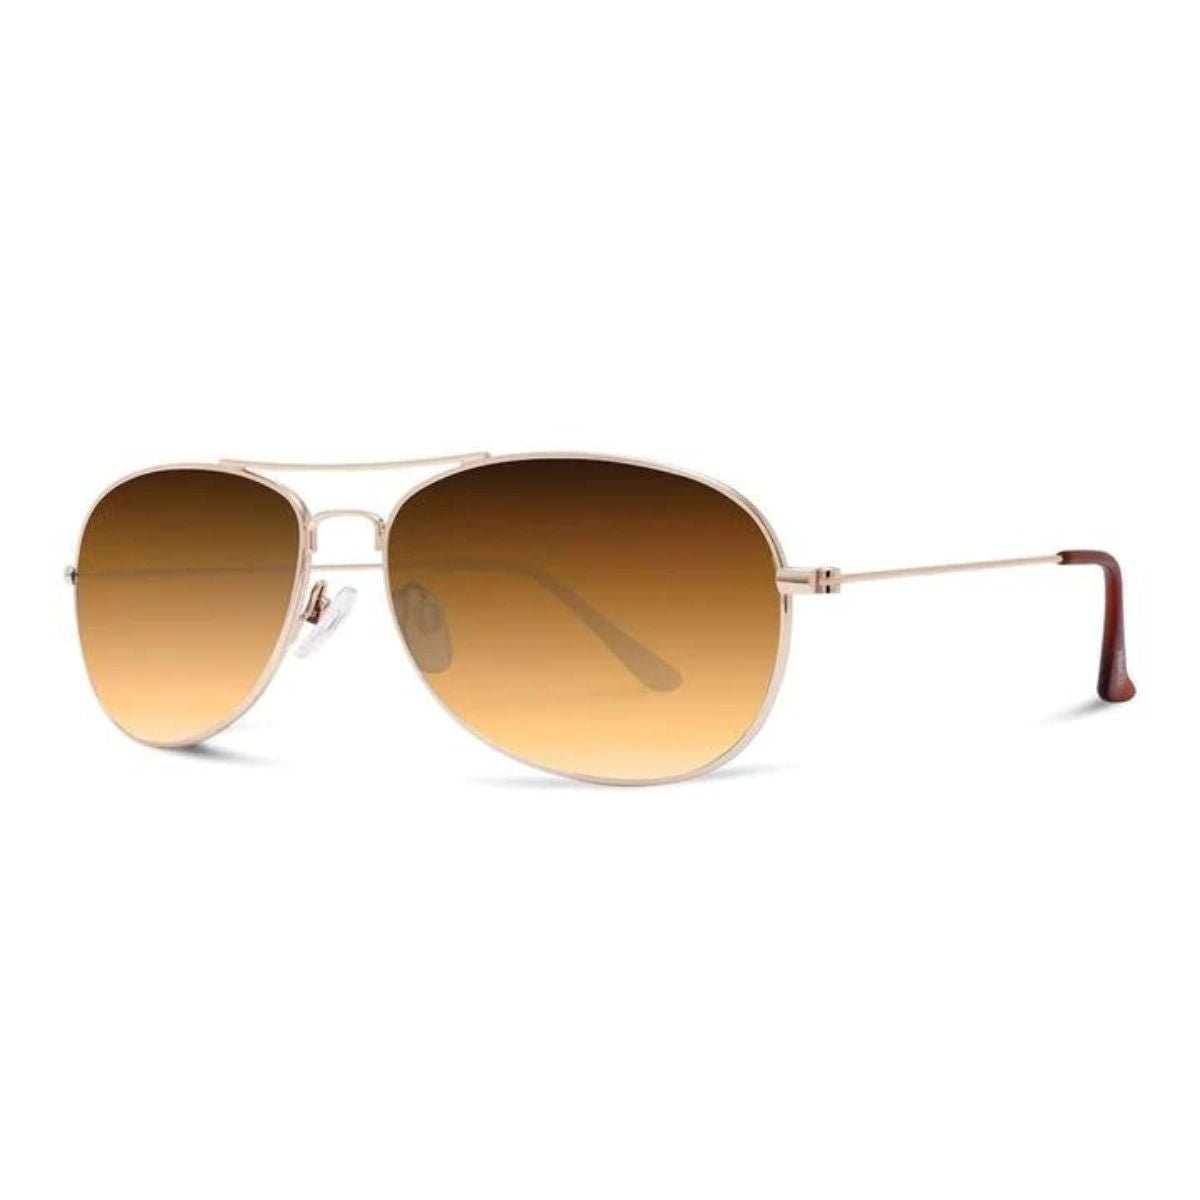 Abaco Avery Sunglasses in Gold/Brown Gradient - BoardCo